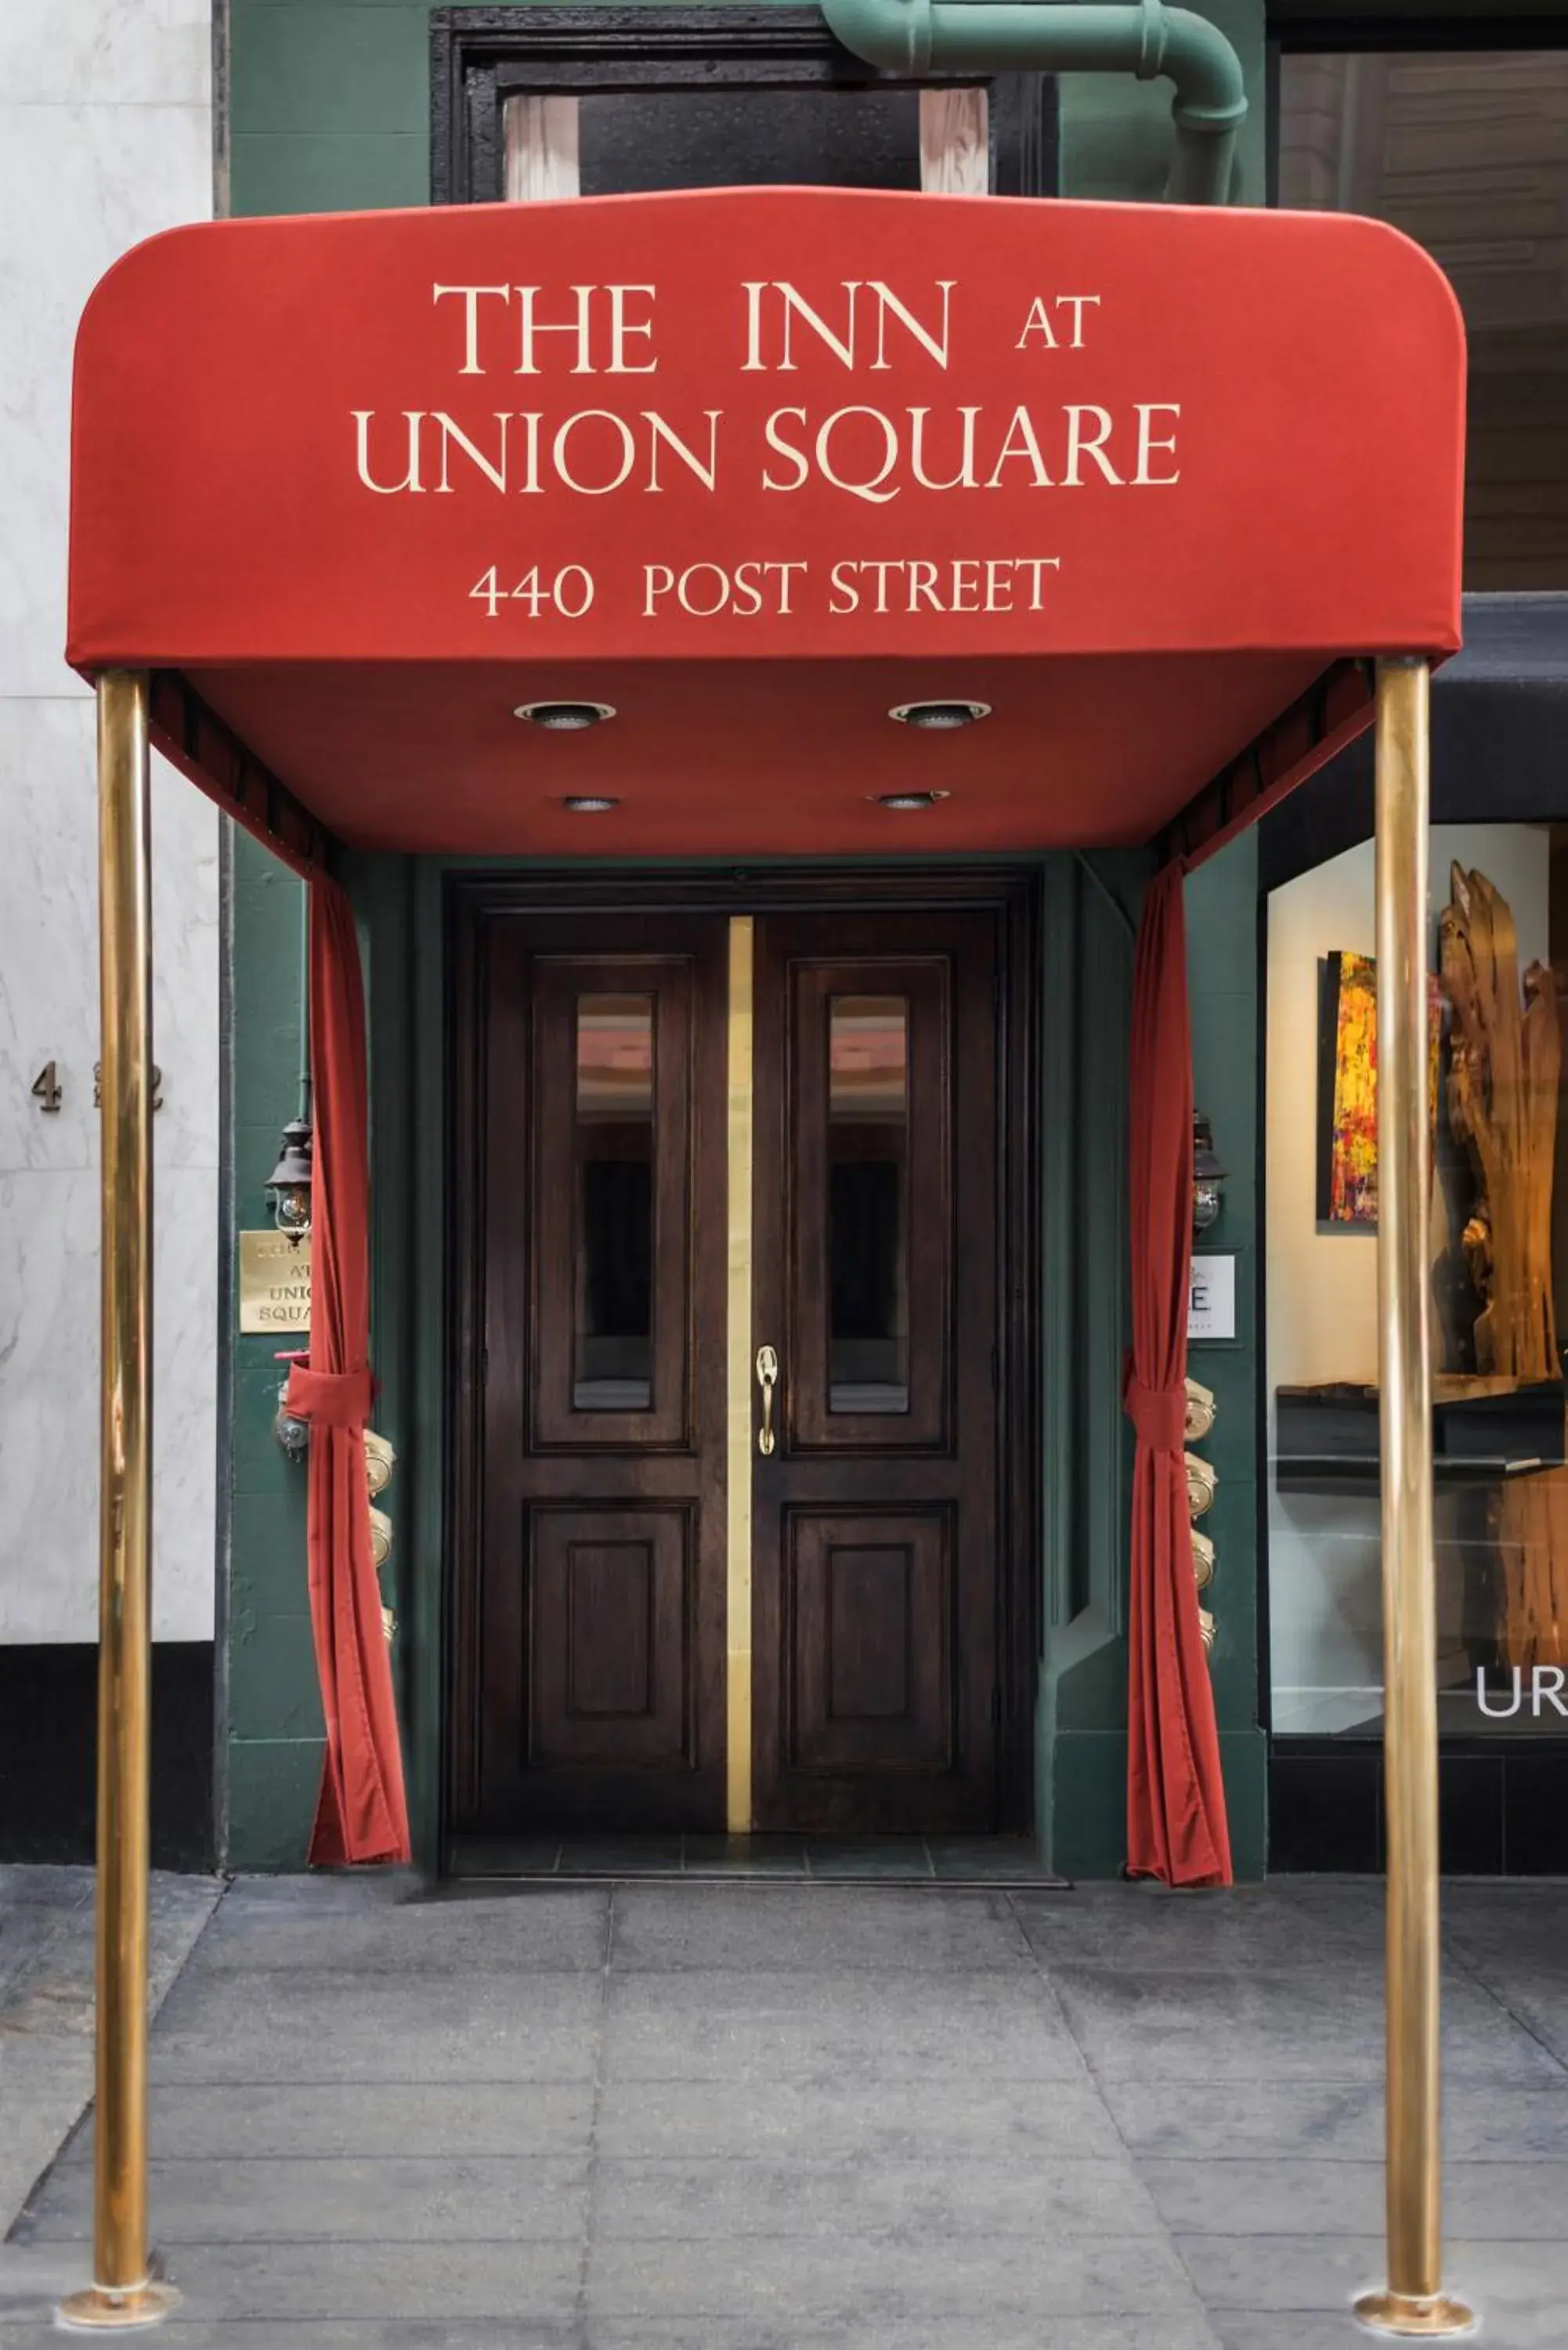 Facade/entrance in Inn at Union Square